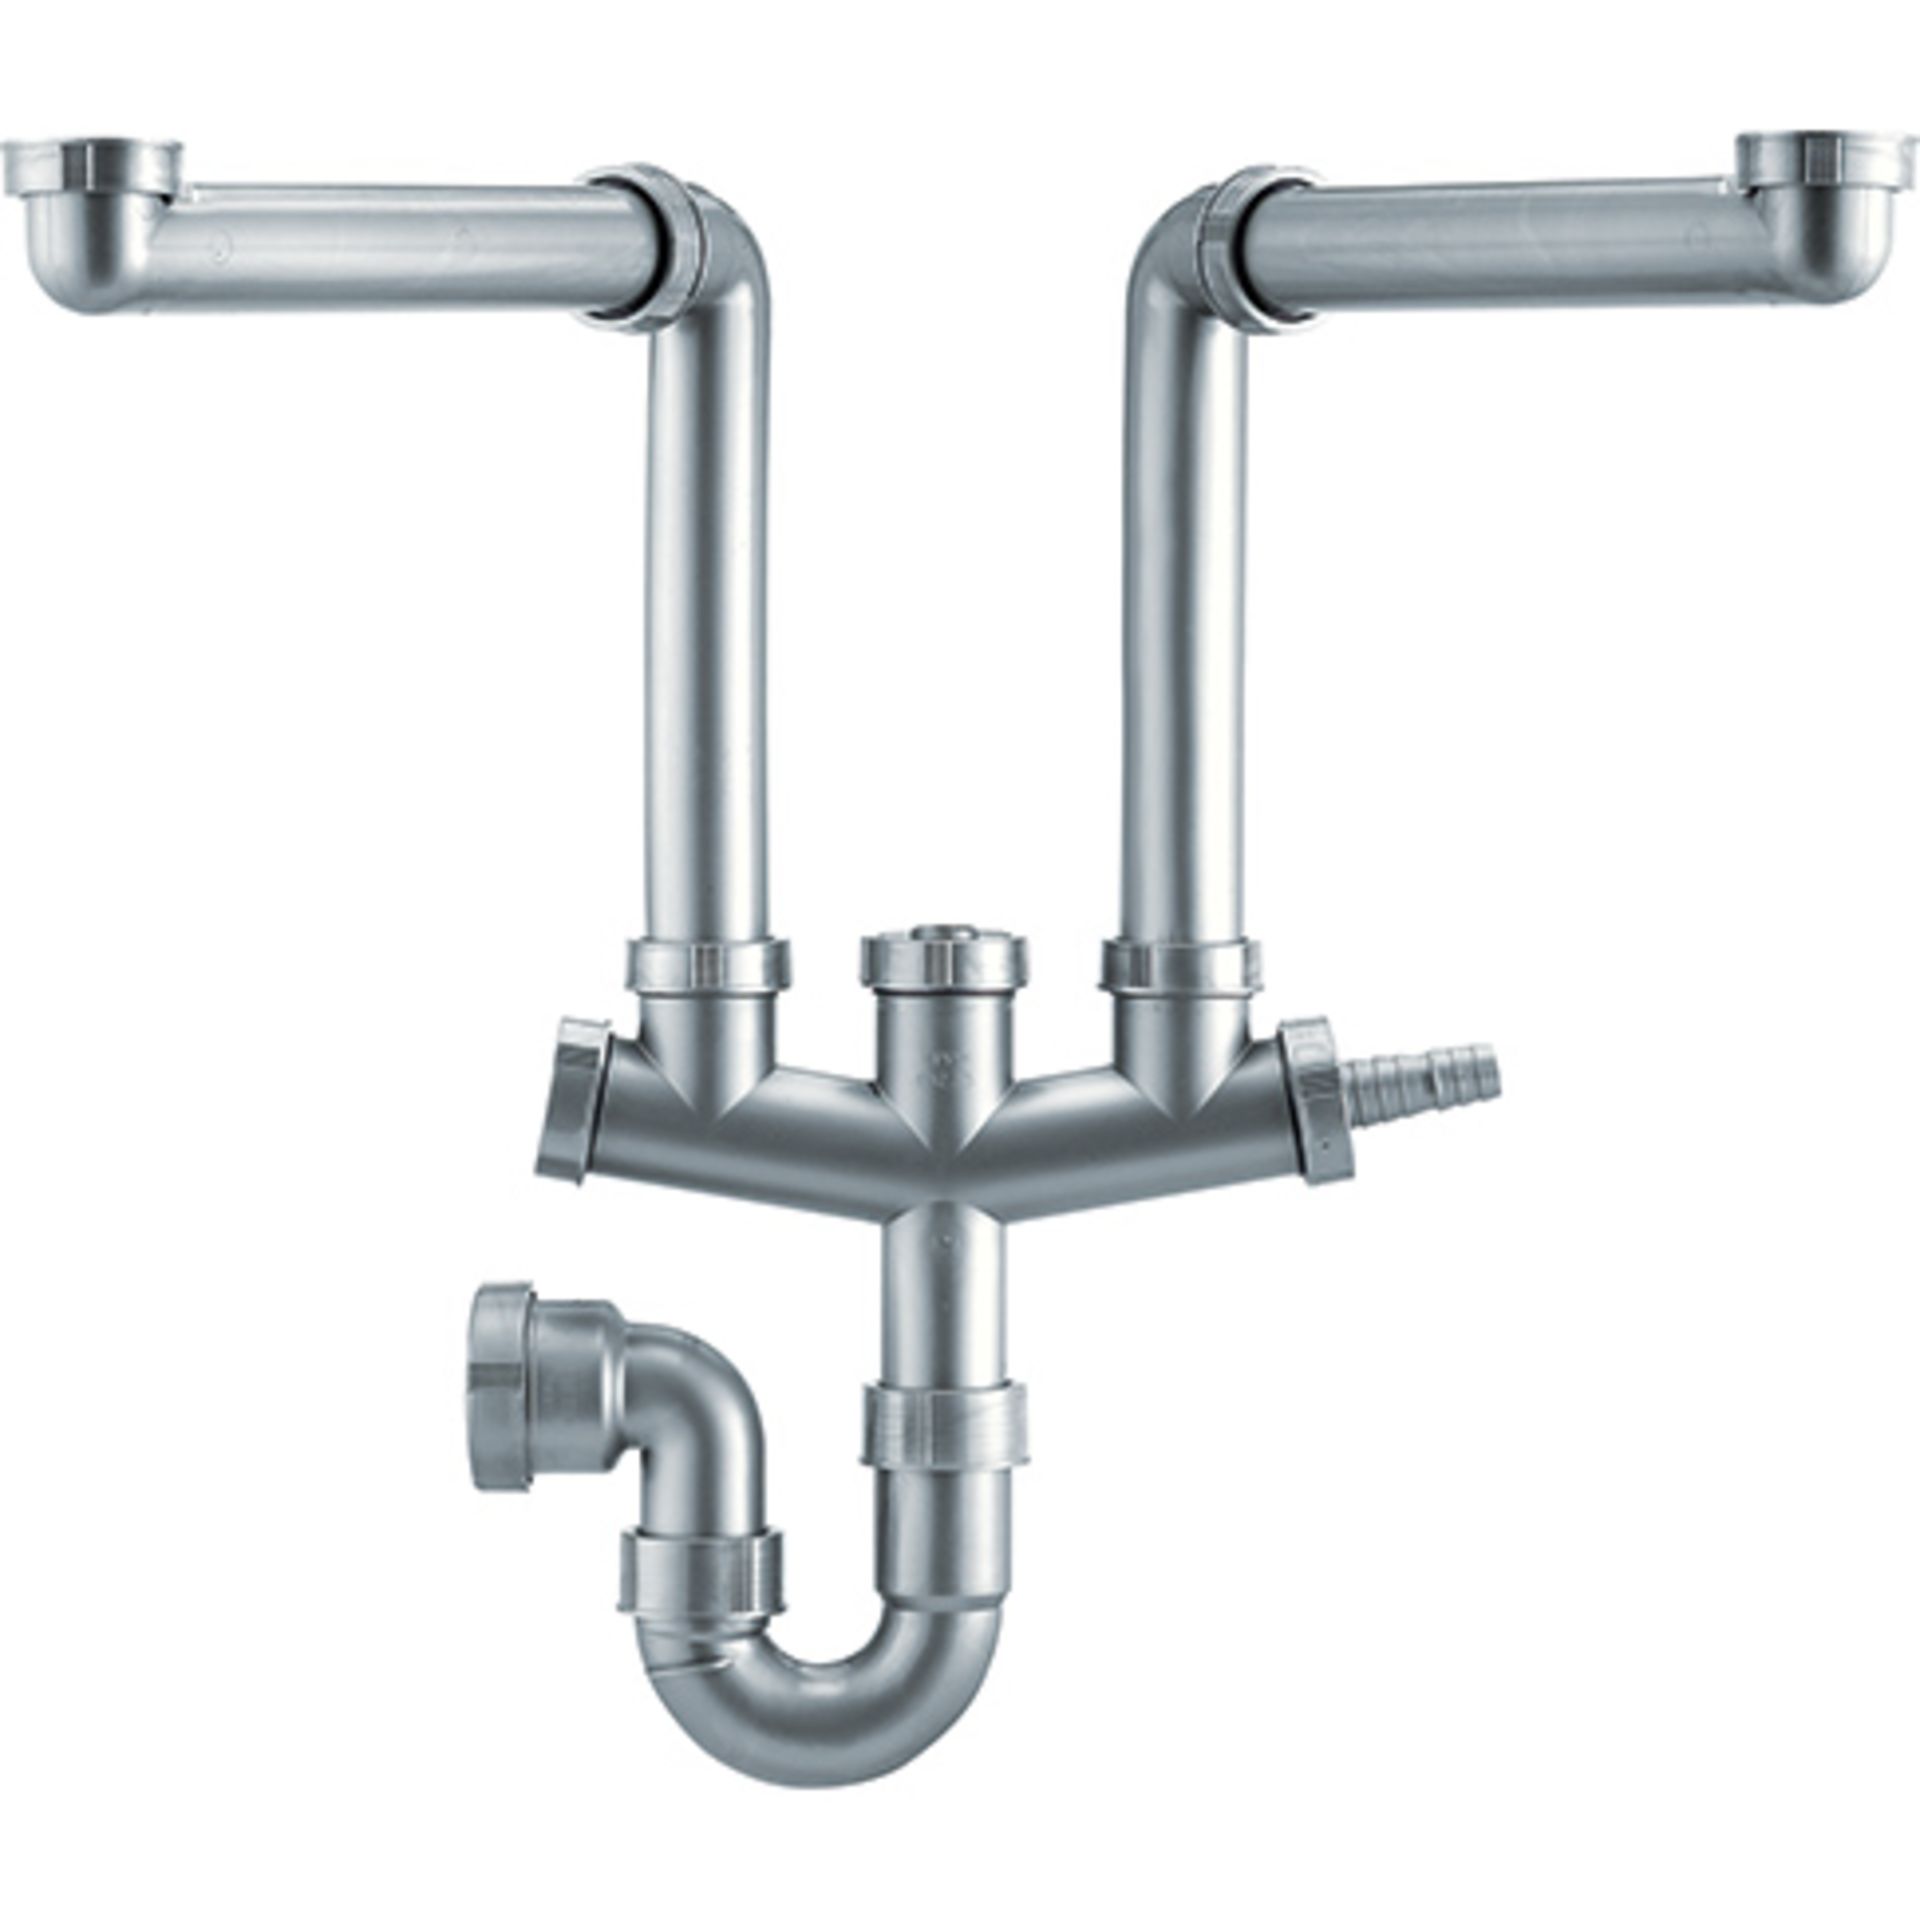 (EX118) NEW Plumbing Kits Siphon II Other. For 1.5 and double bowl sinks. Franke Siphon Plumbin...